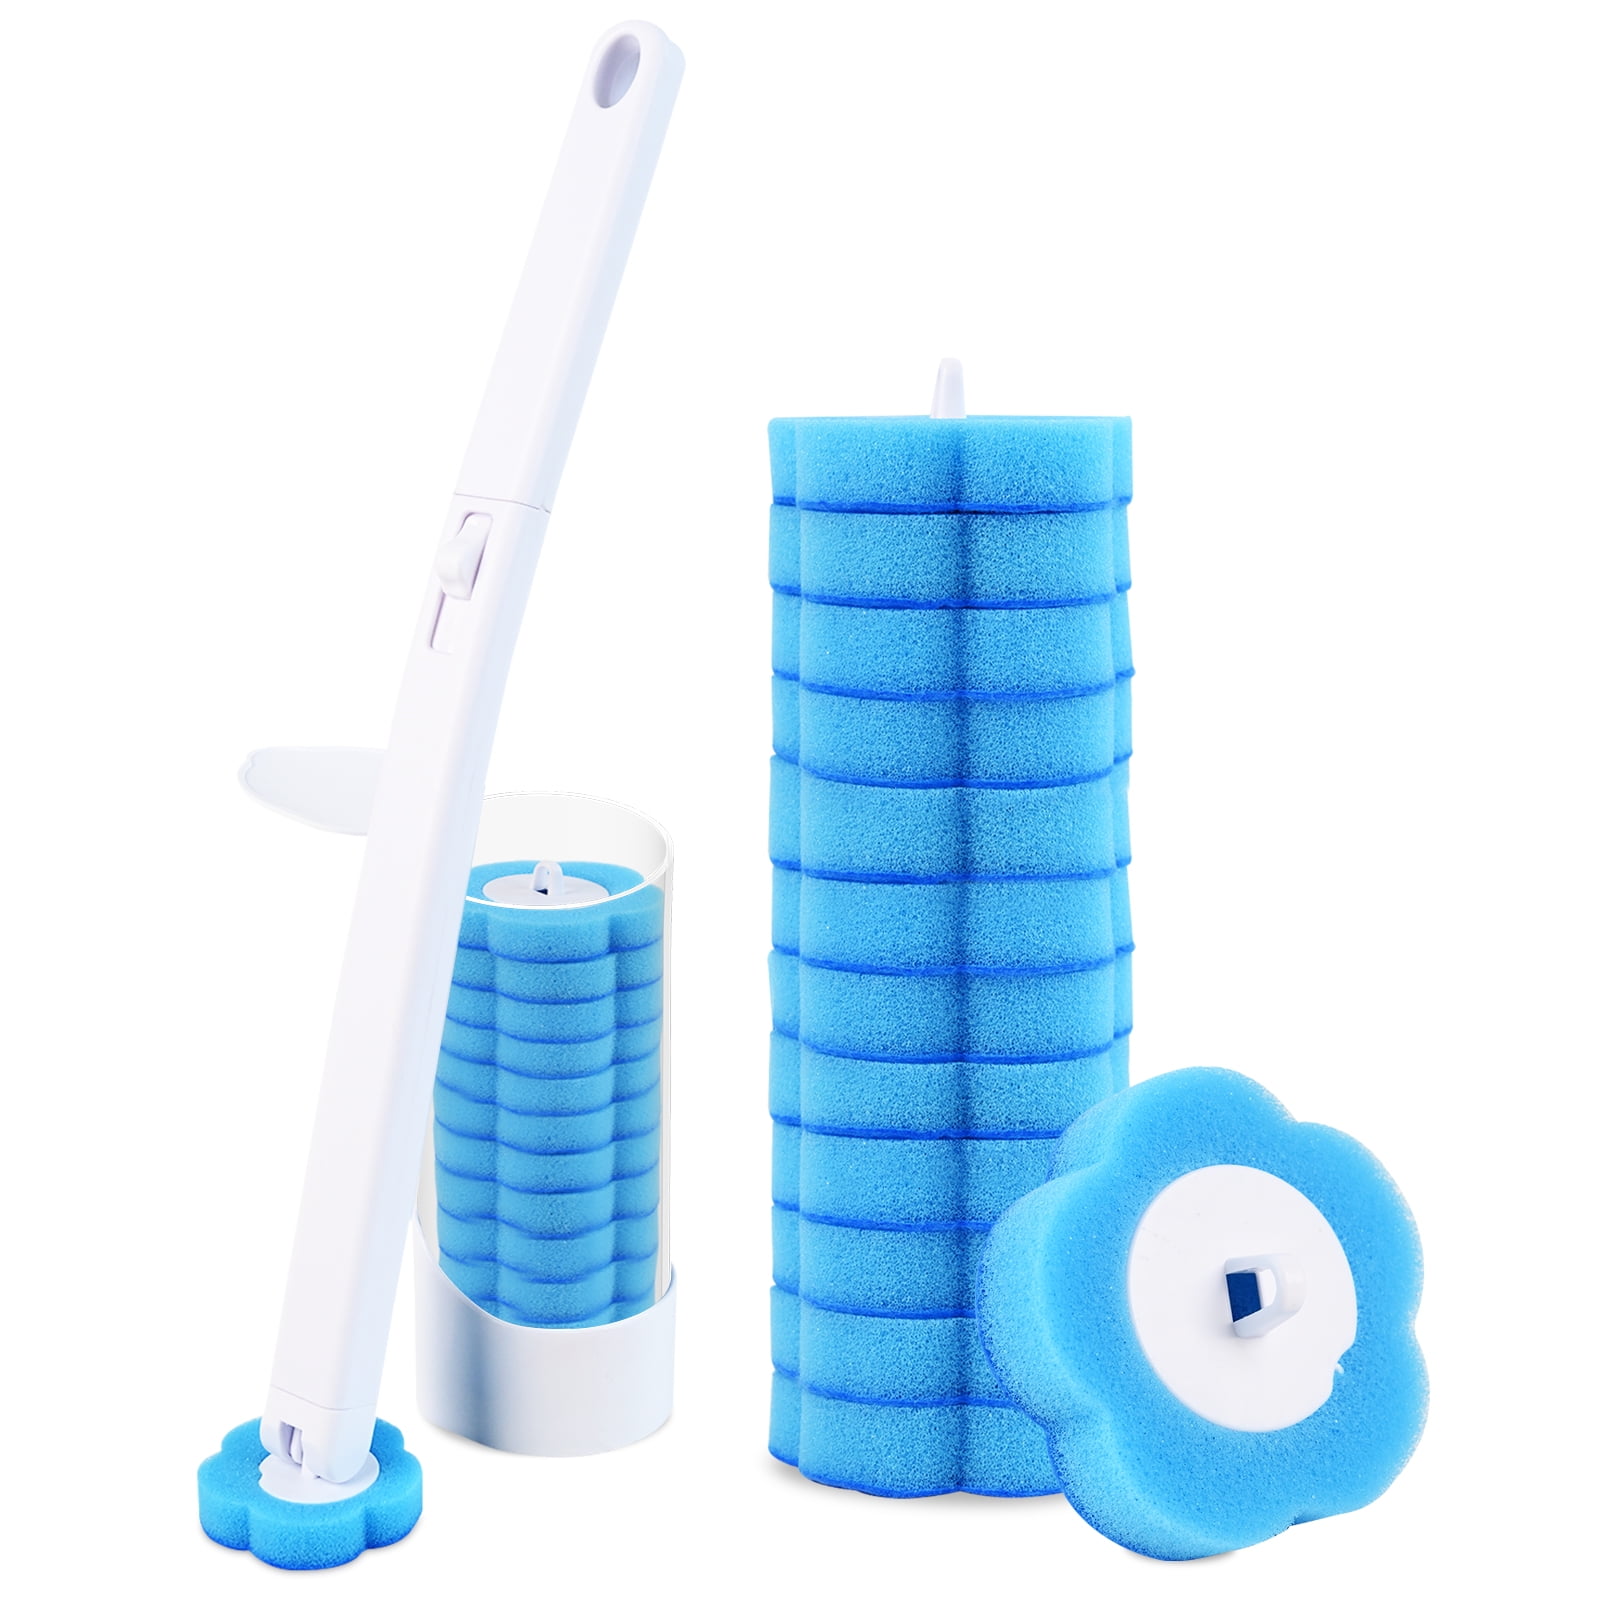 Kevinrooty 50PCS Disposable Crevice Cleaning Brush Tool kit, Disposable  Toilet Brush, Disposable Toilet seat Cleaner Tool (Blue)